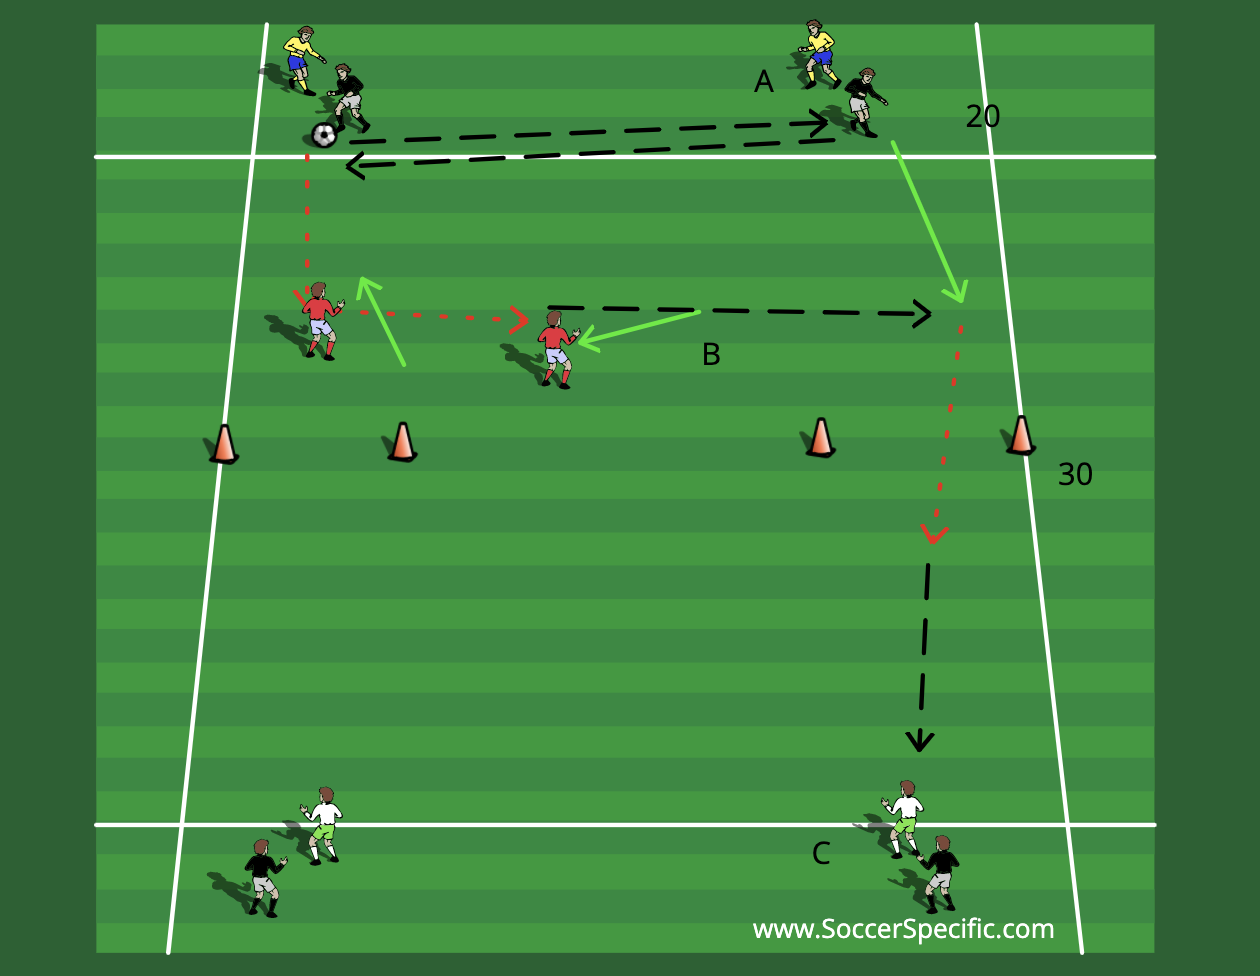 The Art of Penetration 3 | SoccerSpecific.com